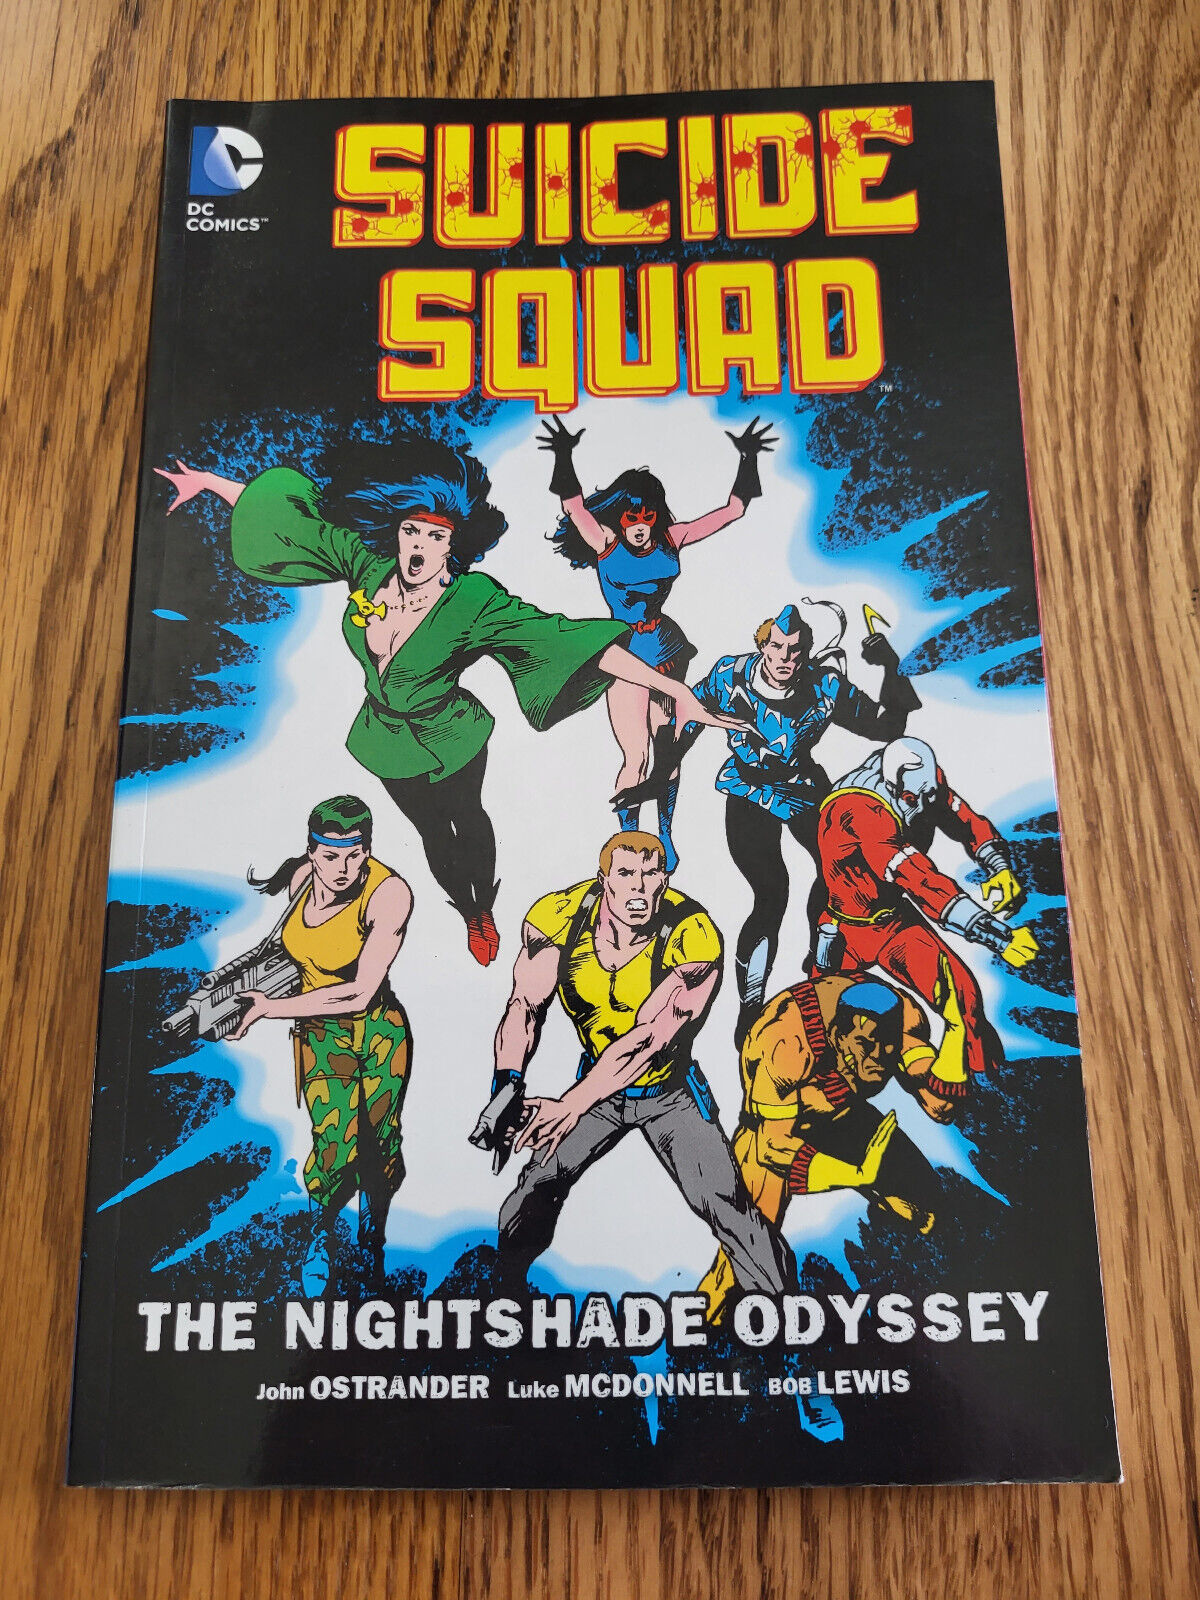 DC Comics Suicide Squad - The Nightshade Odyssey (Trade Paperback, 2015)